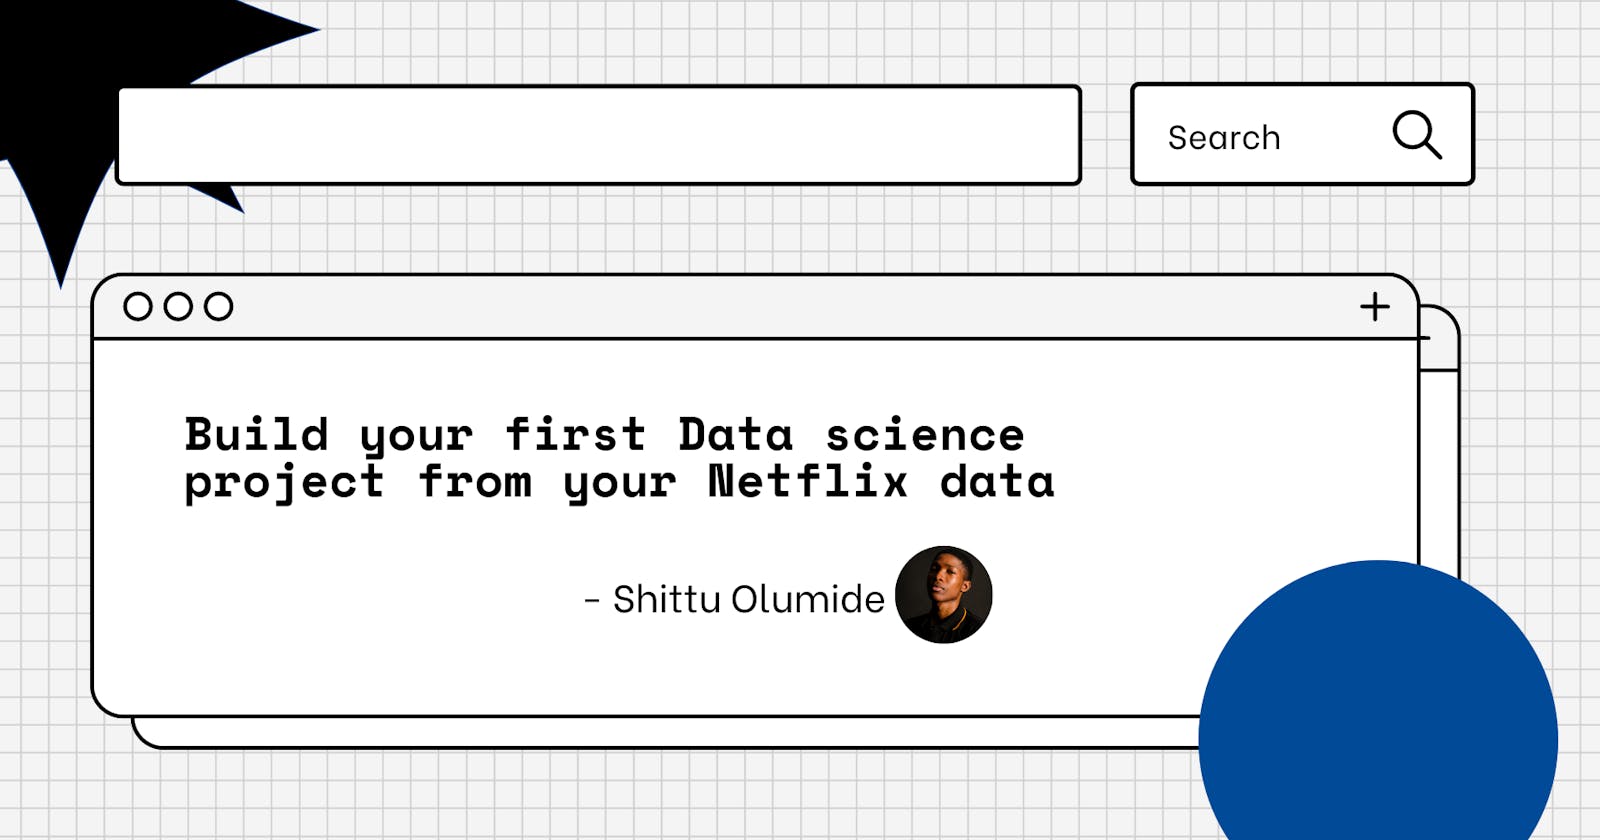 Build your first Data science project from your Netflix data